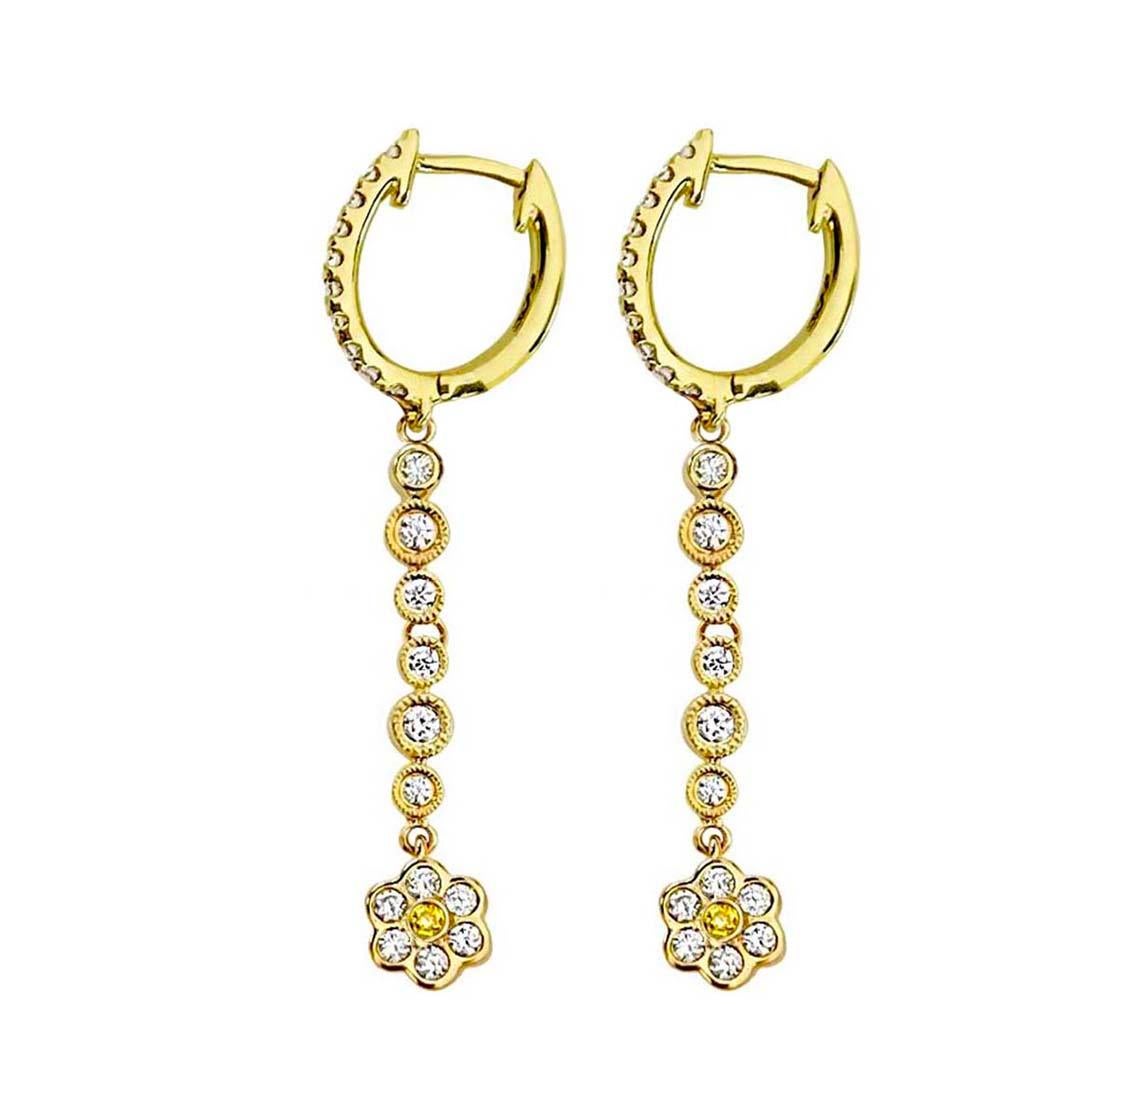 Produced by award winning Italian designer Stefano Vitolo. Stefano creates custom artisanal one of a kind jewelry with excellent gemstones in a truly old world Italian craftmanship.
This handcrafted earrings has 0.49 total carat weight of F/G color